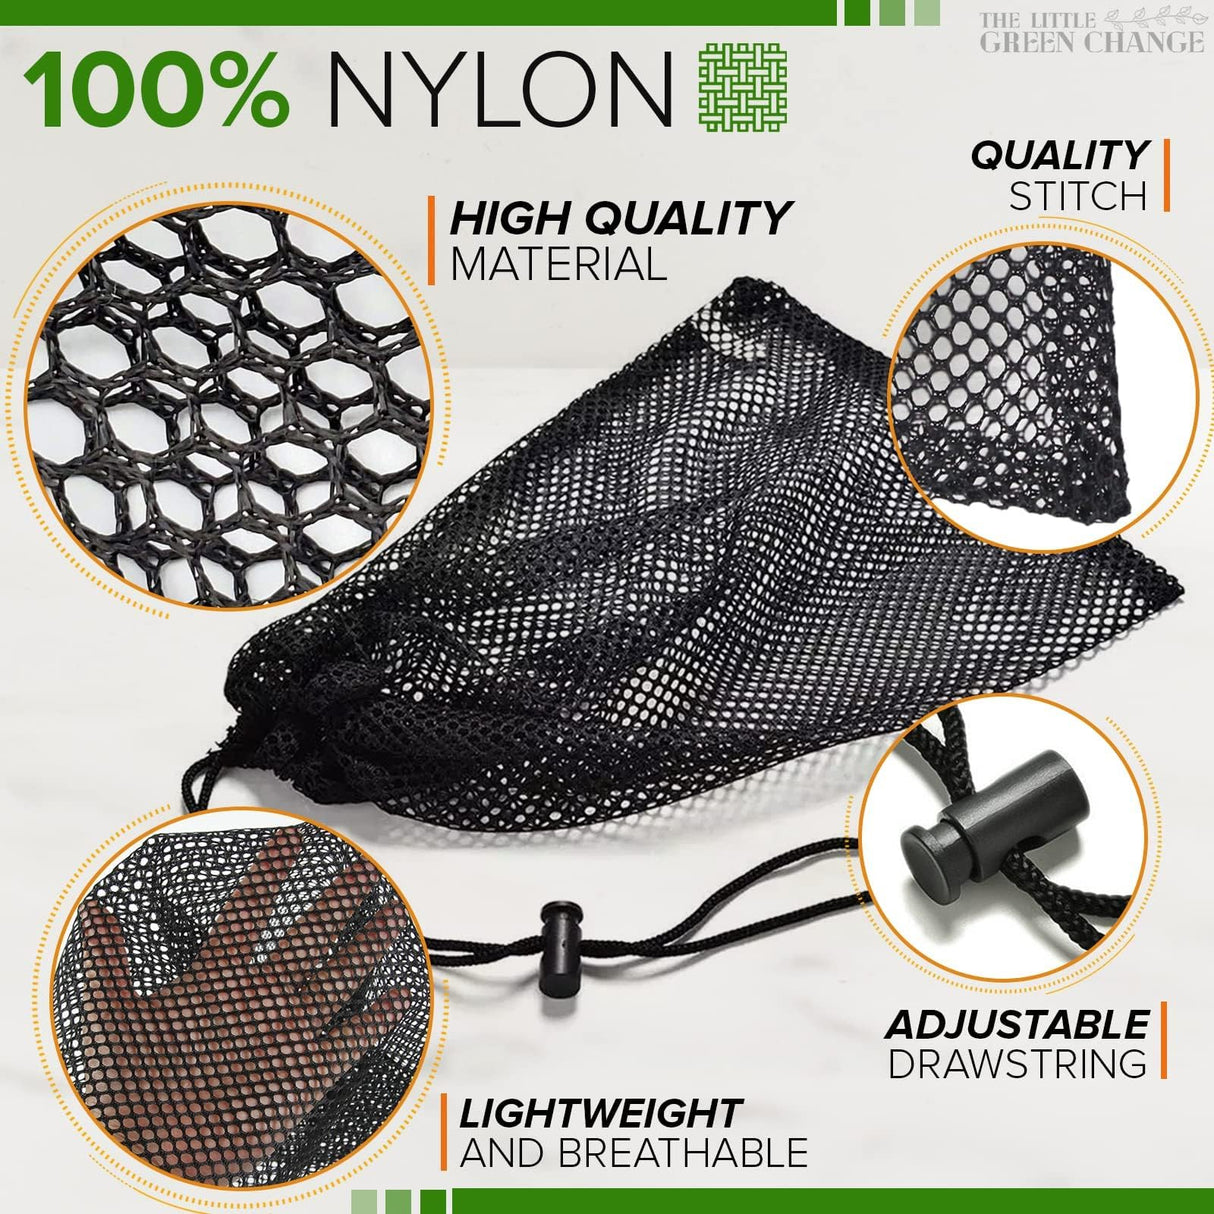 10 PCS Nylon Mesh Bags Drawstring for Storage of Small and Medium Sized Items - Multipurpose Mesh Bag With Drawstring - Cord Lock Mesh Drawstring Bags for Carrying Goods While Traveling or Camping